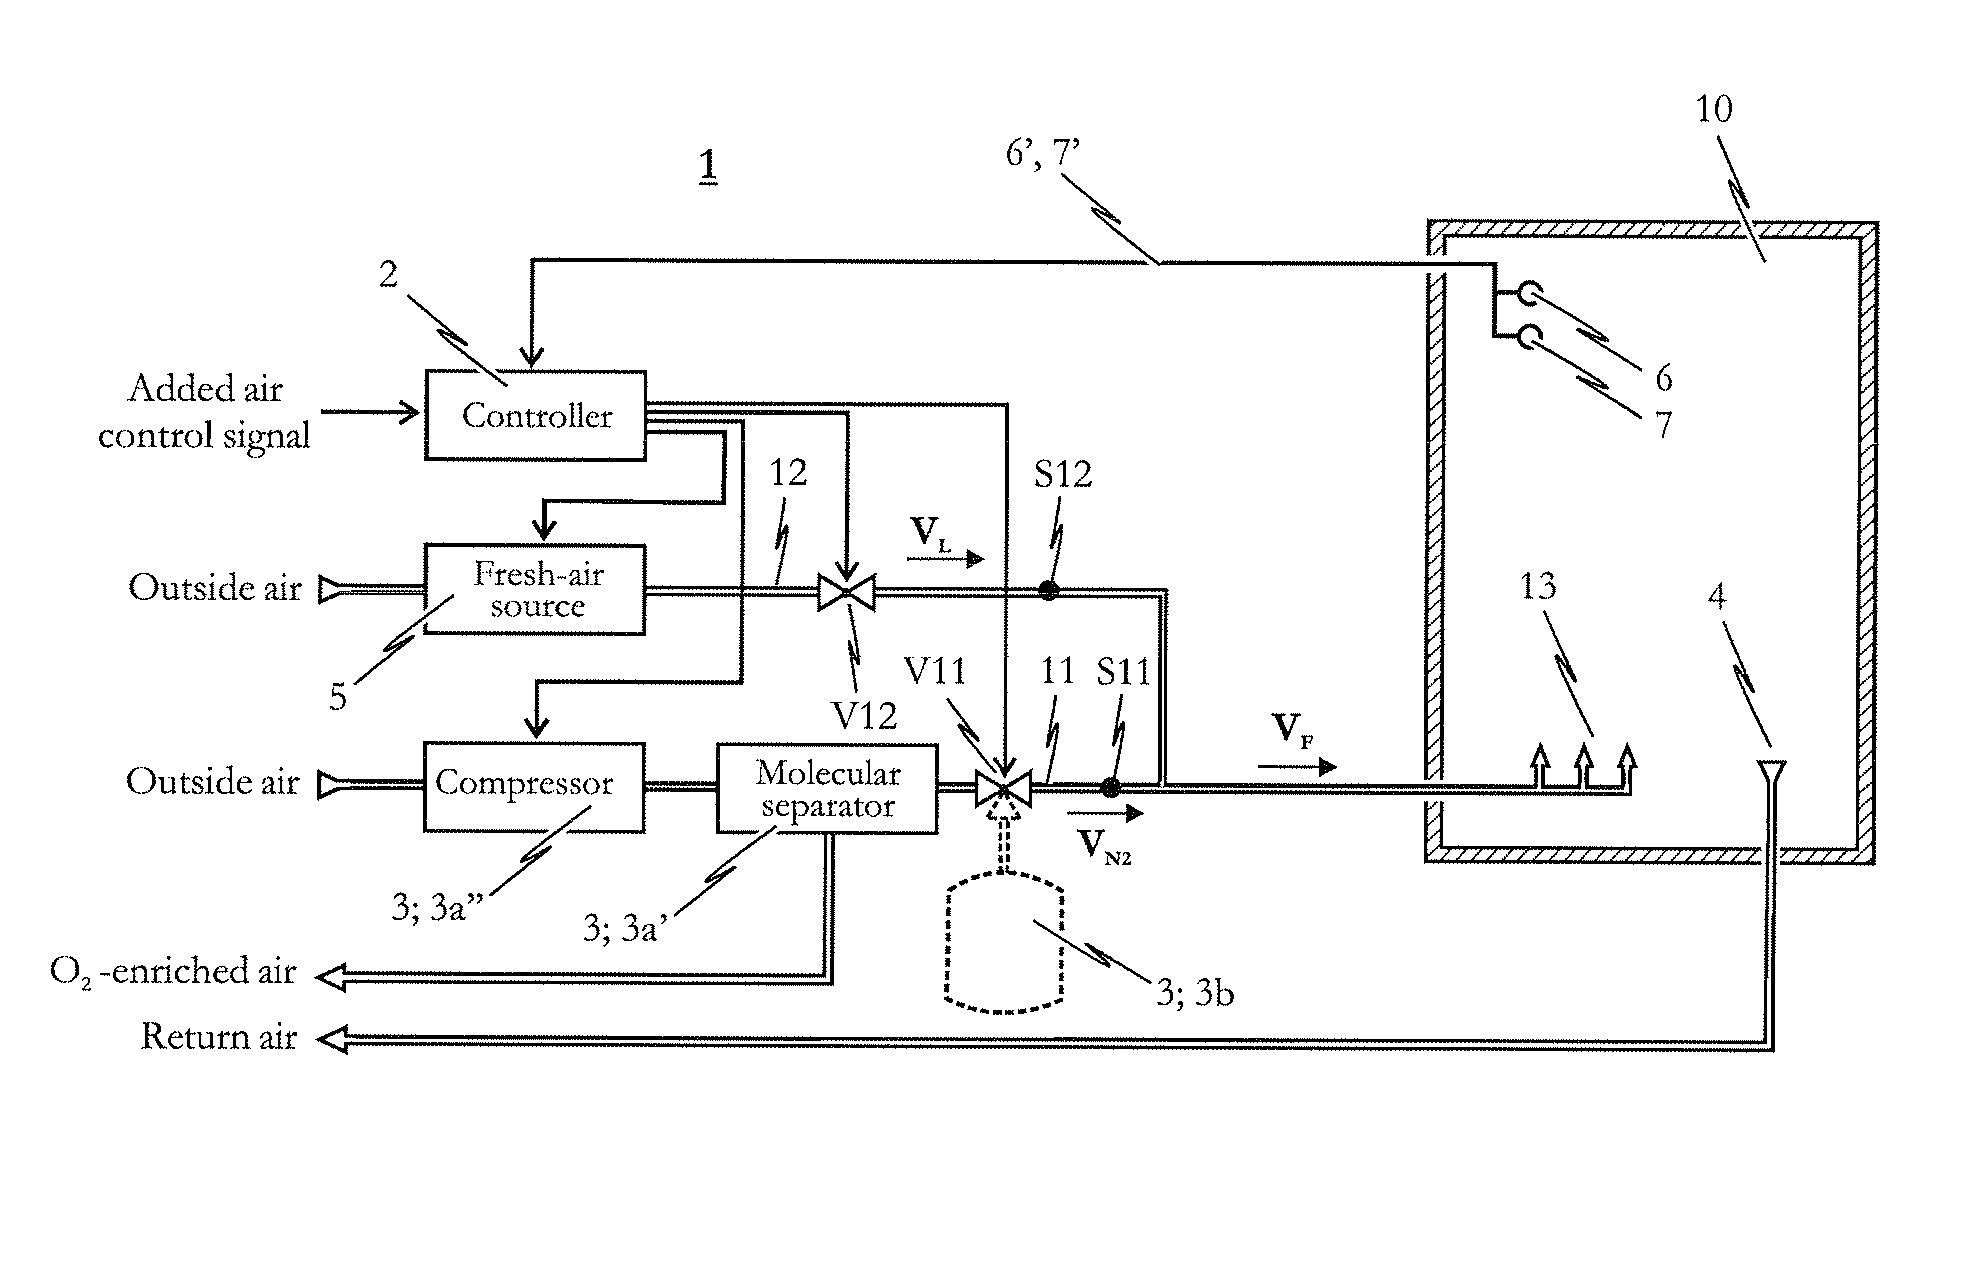 Method and apparatus for supplying additional air in a controlled manner